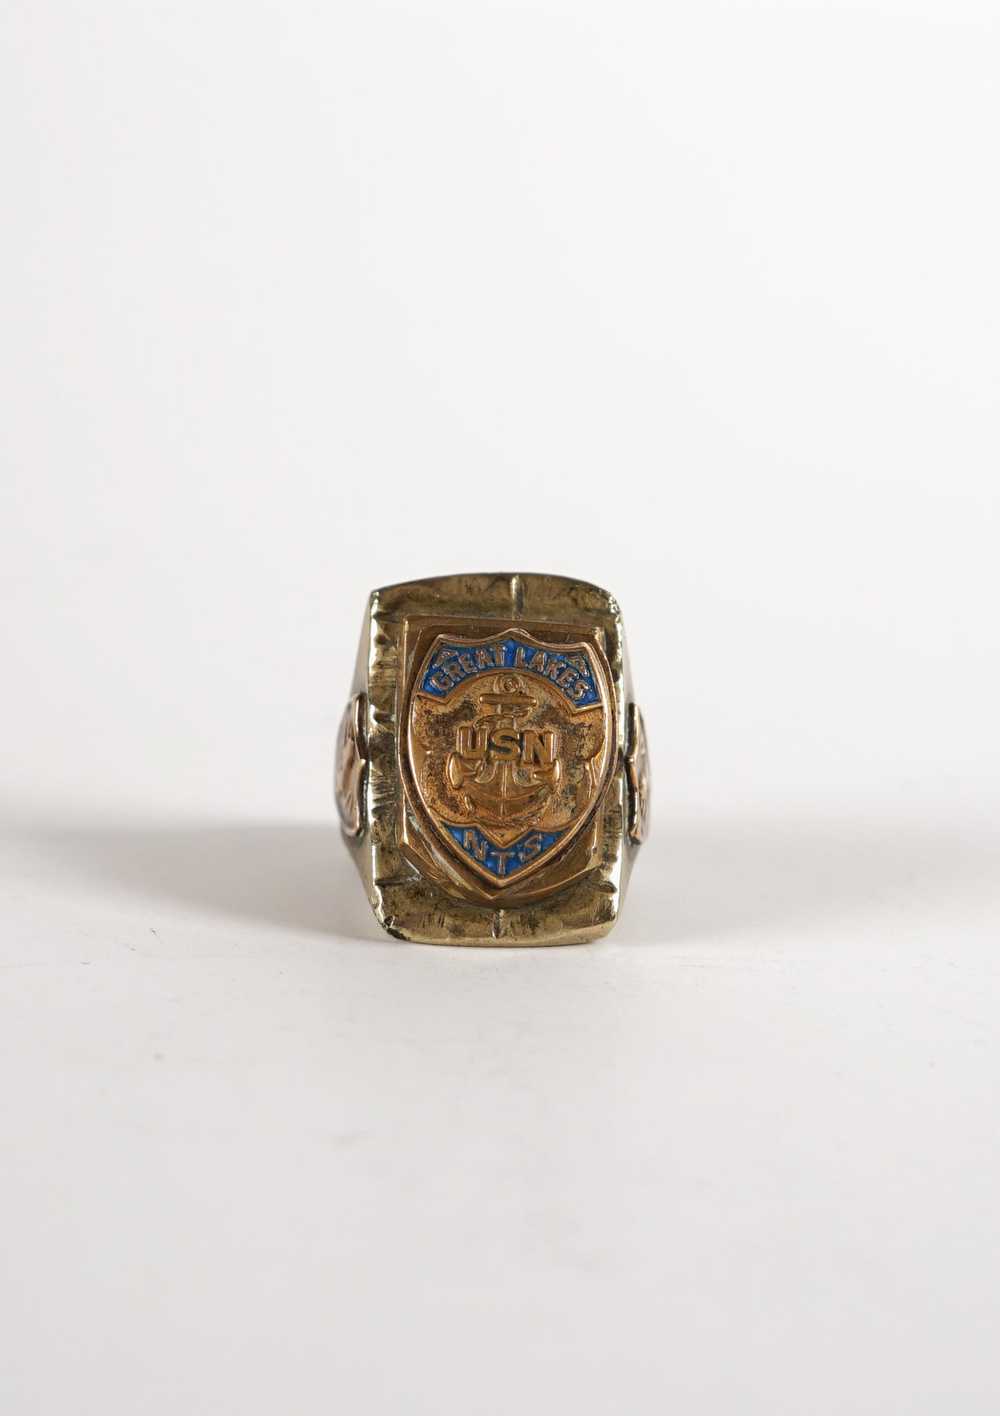 Mexican Biker Ring - image 1